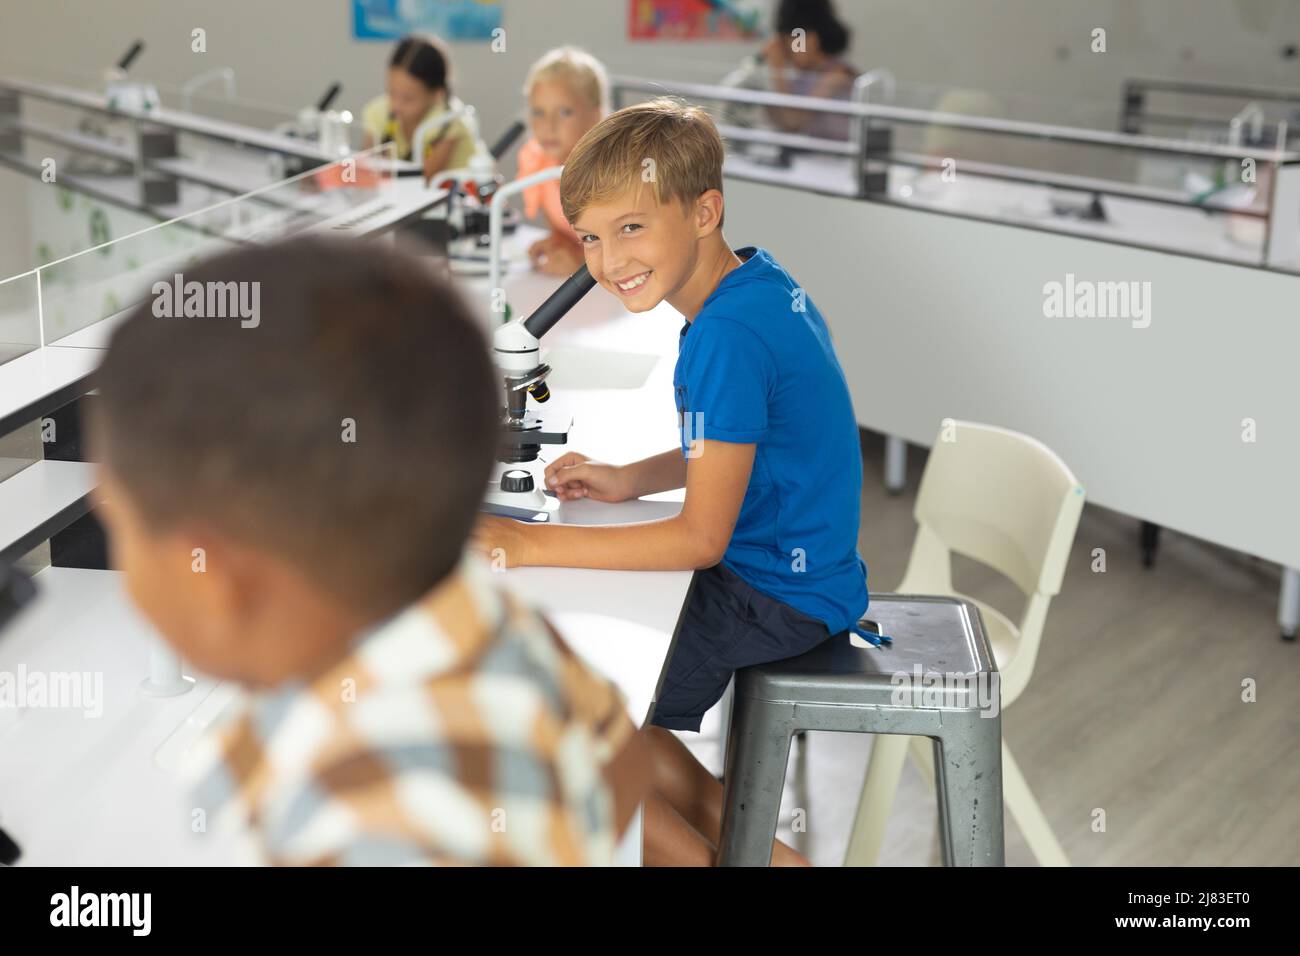 Smiling caucasian elementary boy looking at biracial male classmate in laboratory Stock Photo